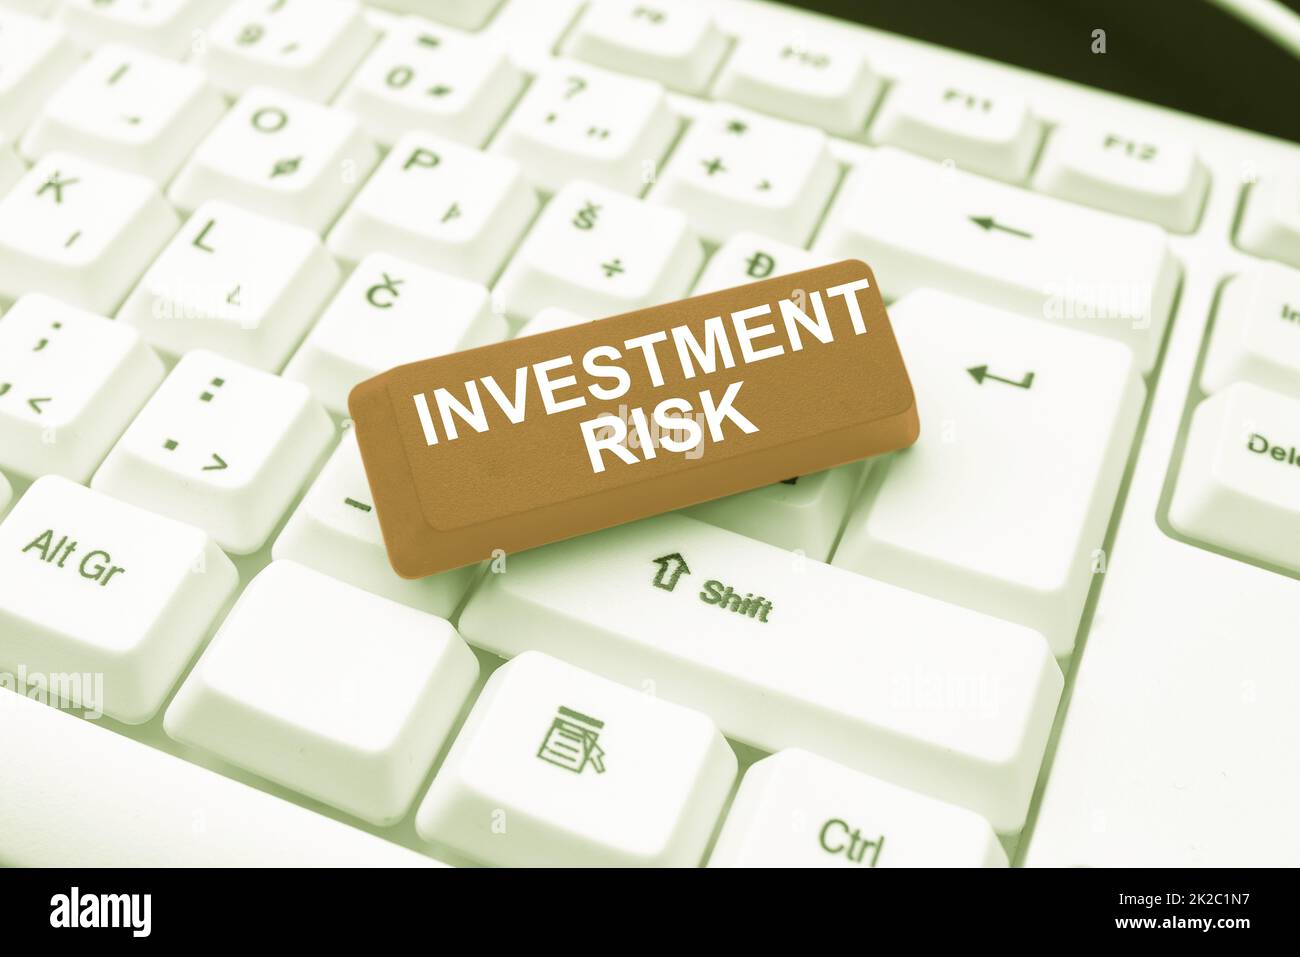 Sign displaying Investment Risk. Business concept the probability of potential financial loss relative to gain Connecting With Online Friends, Making Acquaintances On The Internet Stock Photo